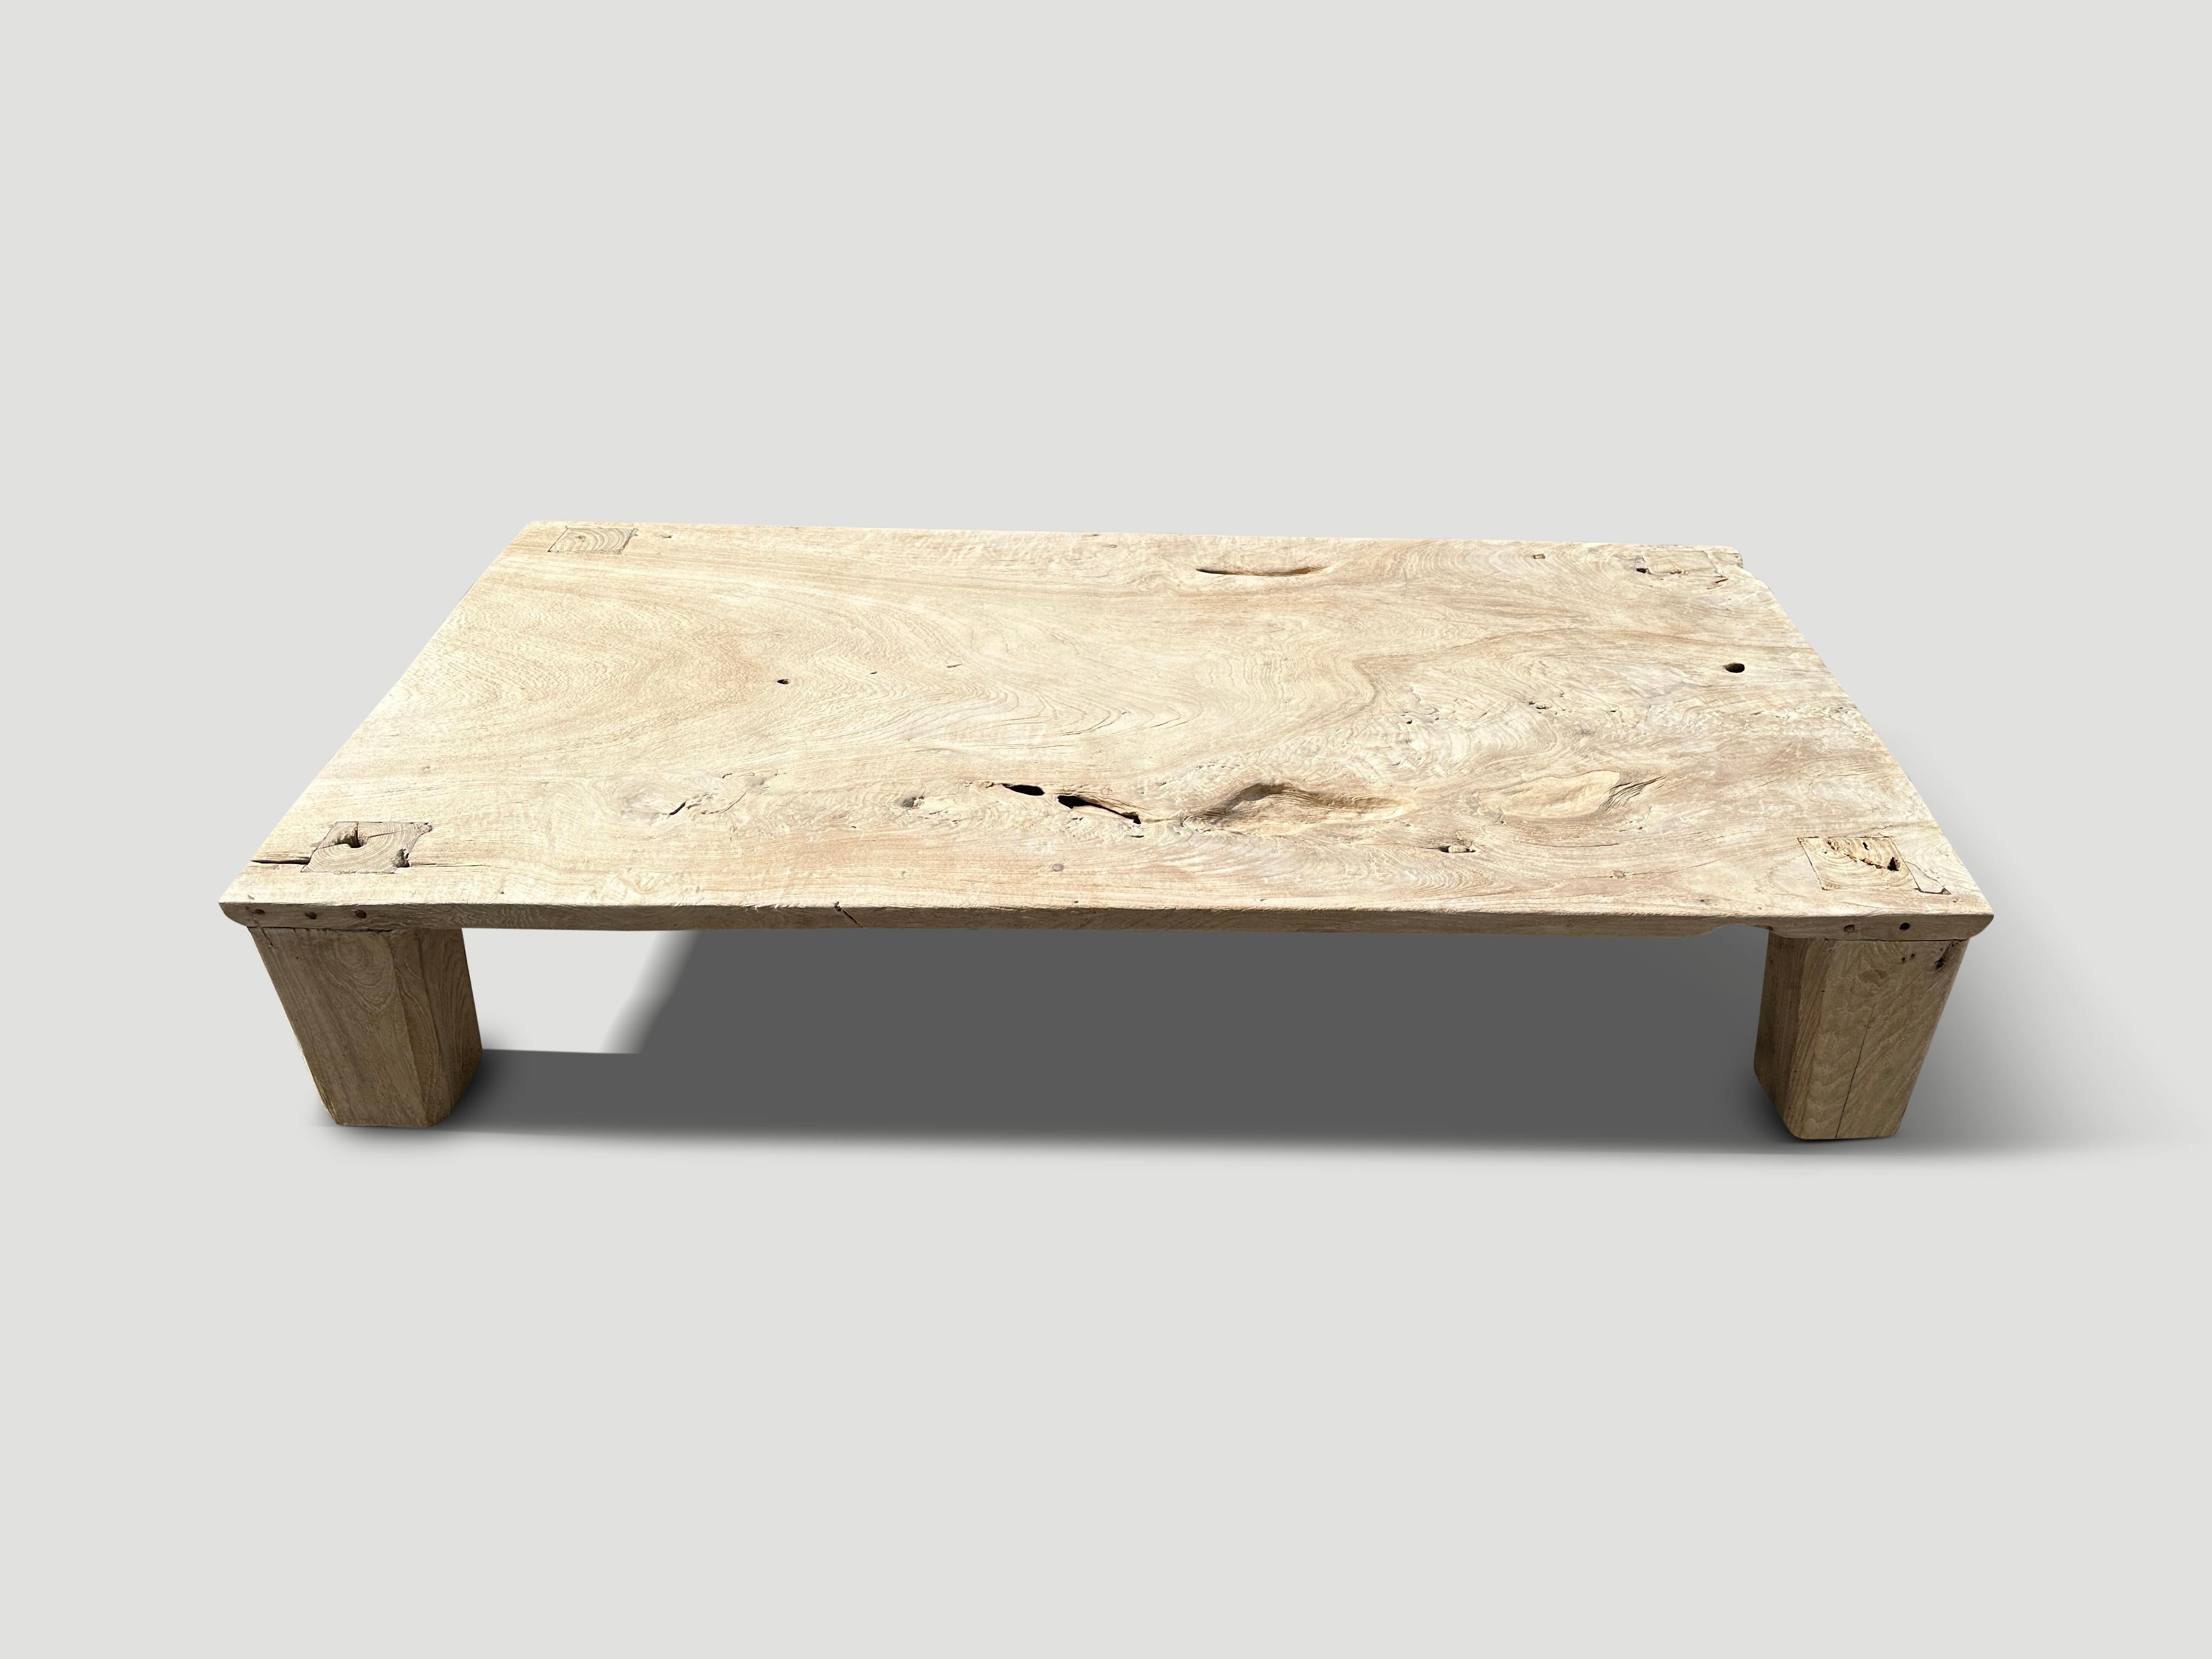 Single teak wood panel with beautiful detail. We added block style legs to this minimalist coffee table and a light white wash revealing the stunning wood grain. It’s all in the details.

The St. Barts Collection features an exciting line of organic